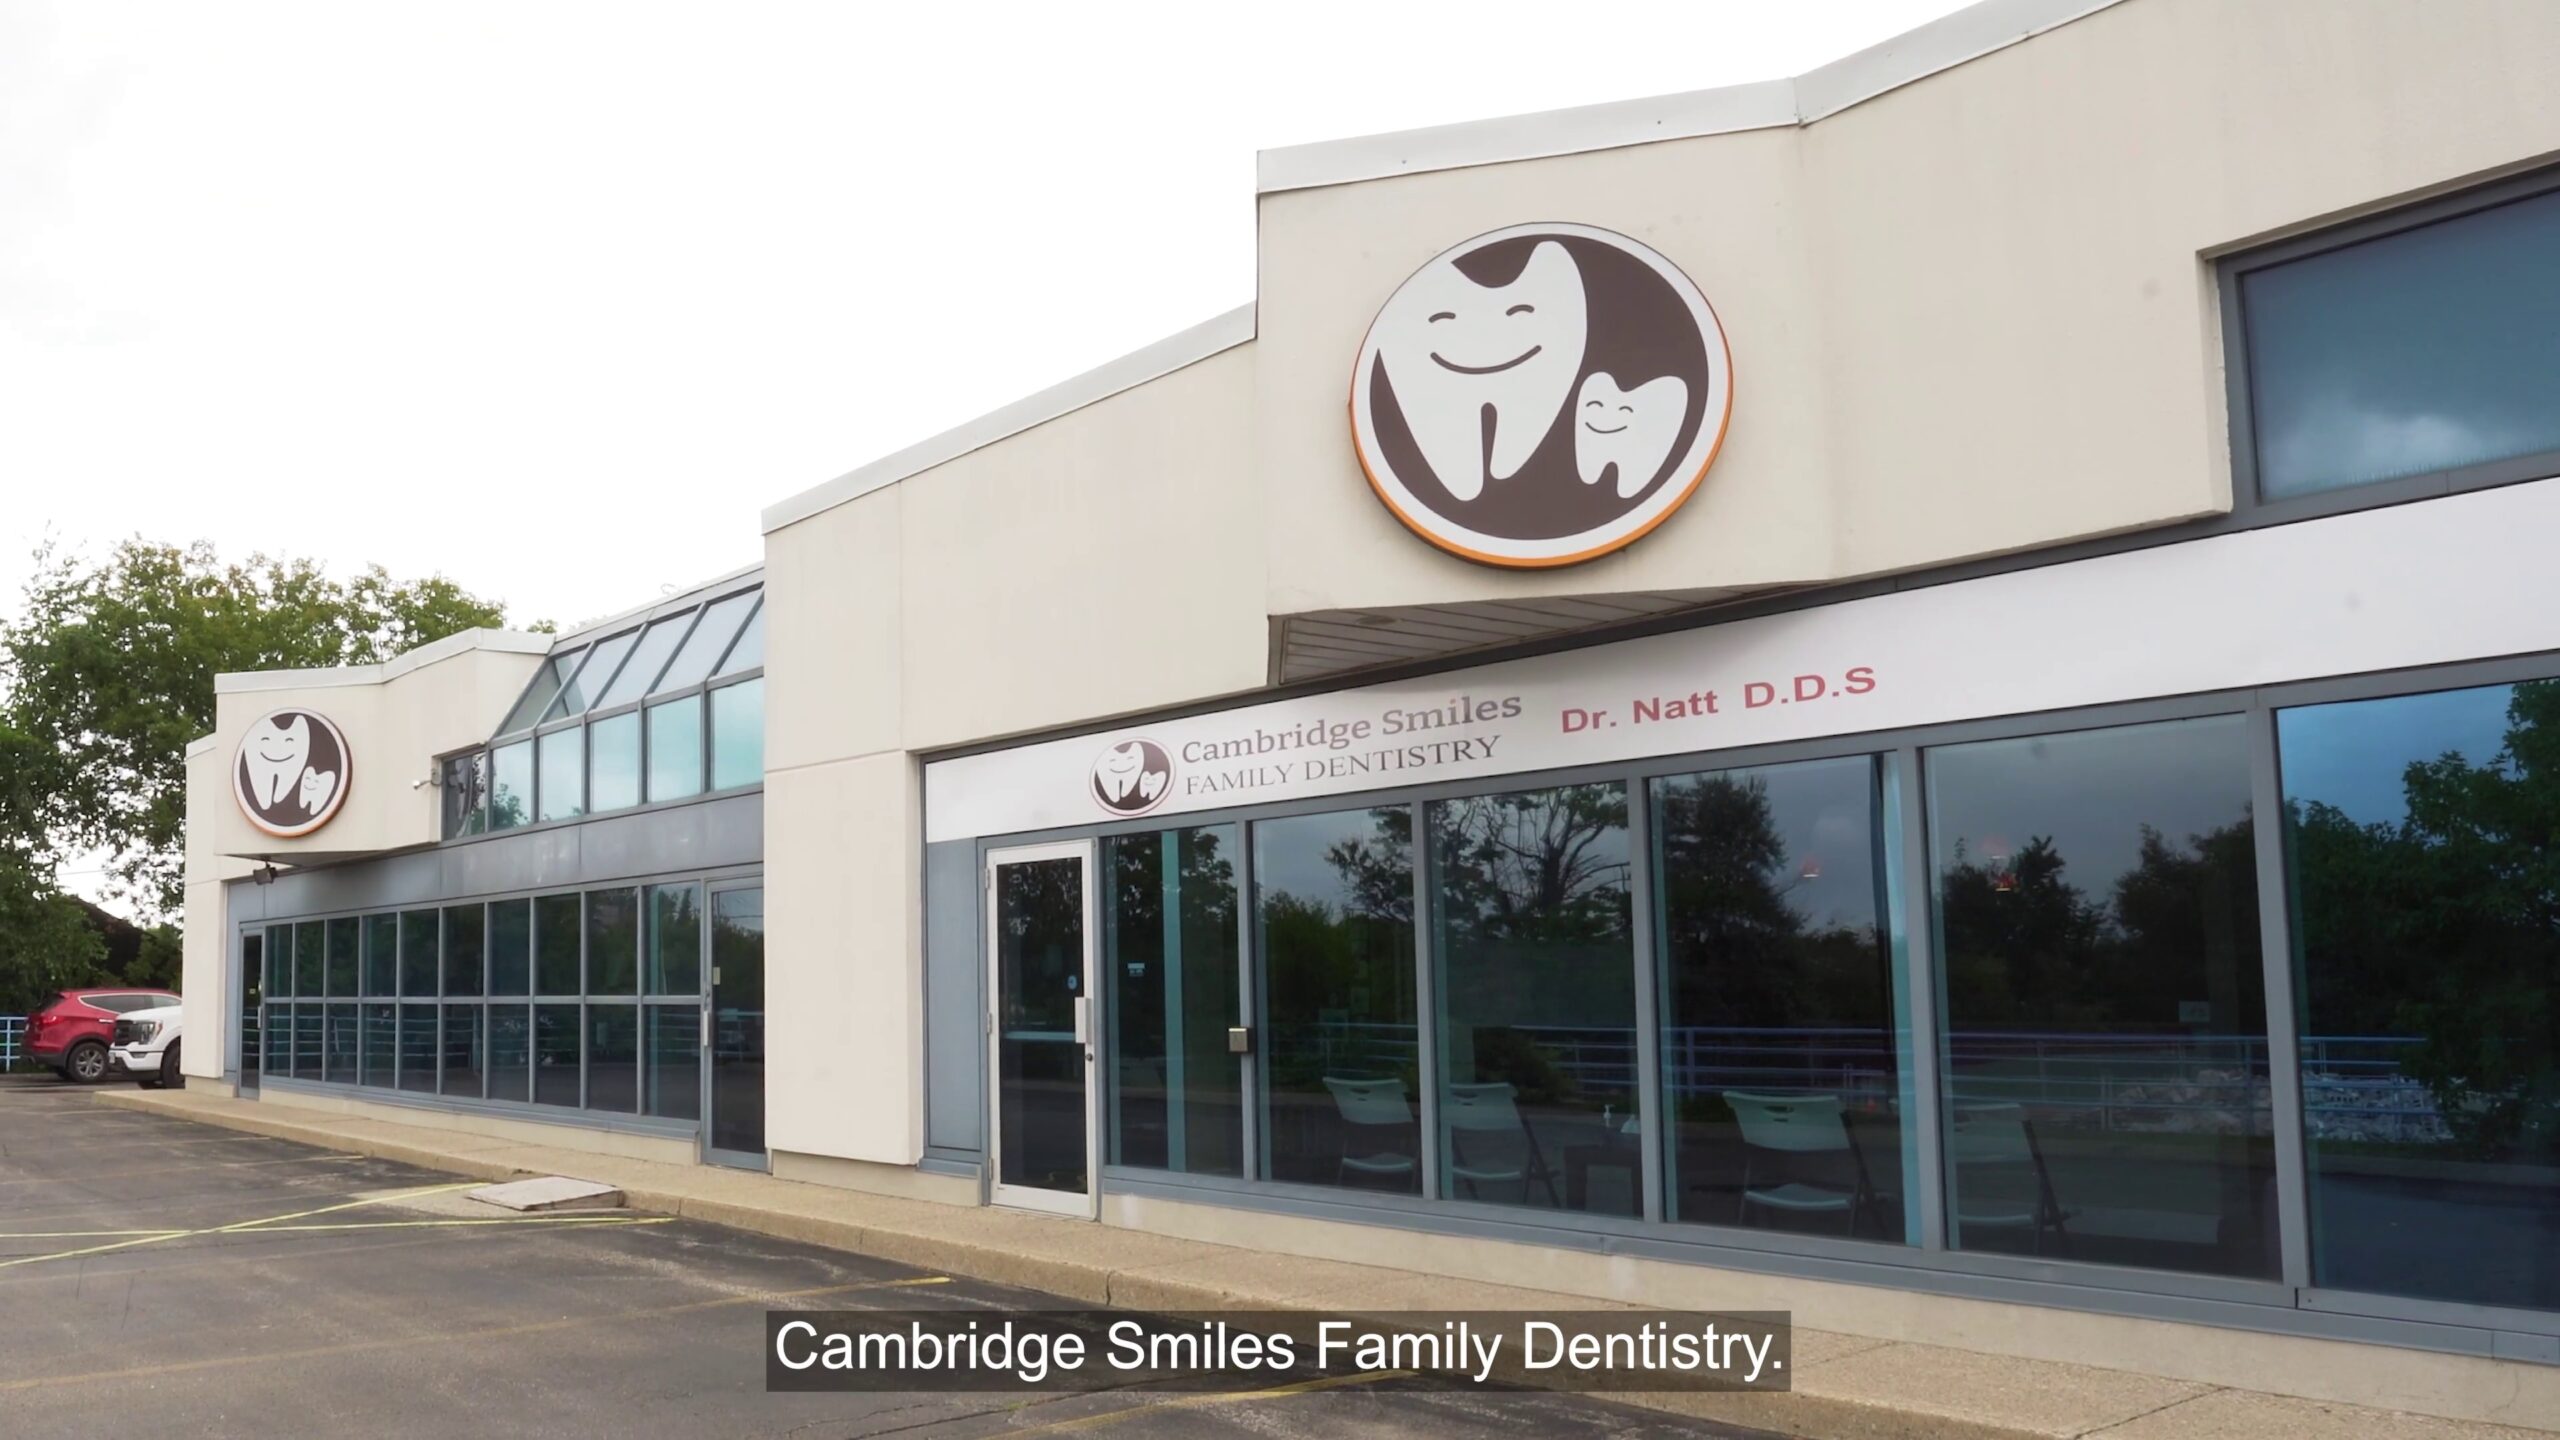 Cosmetic dentistry clinic in Cambridge